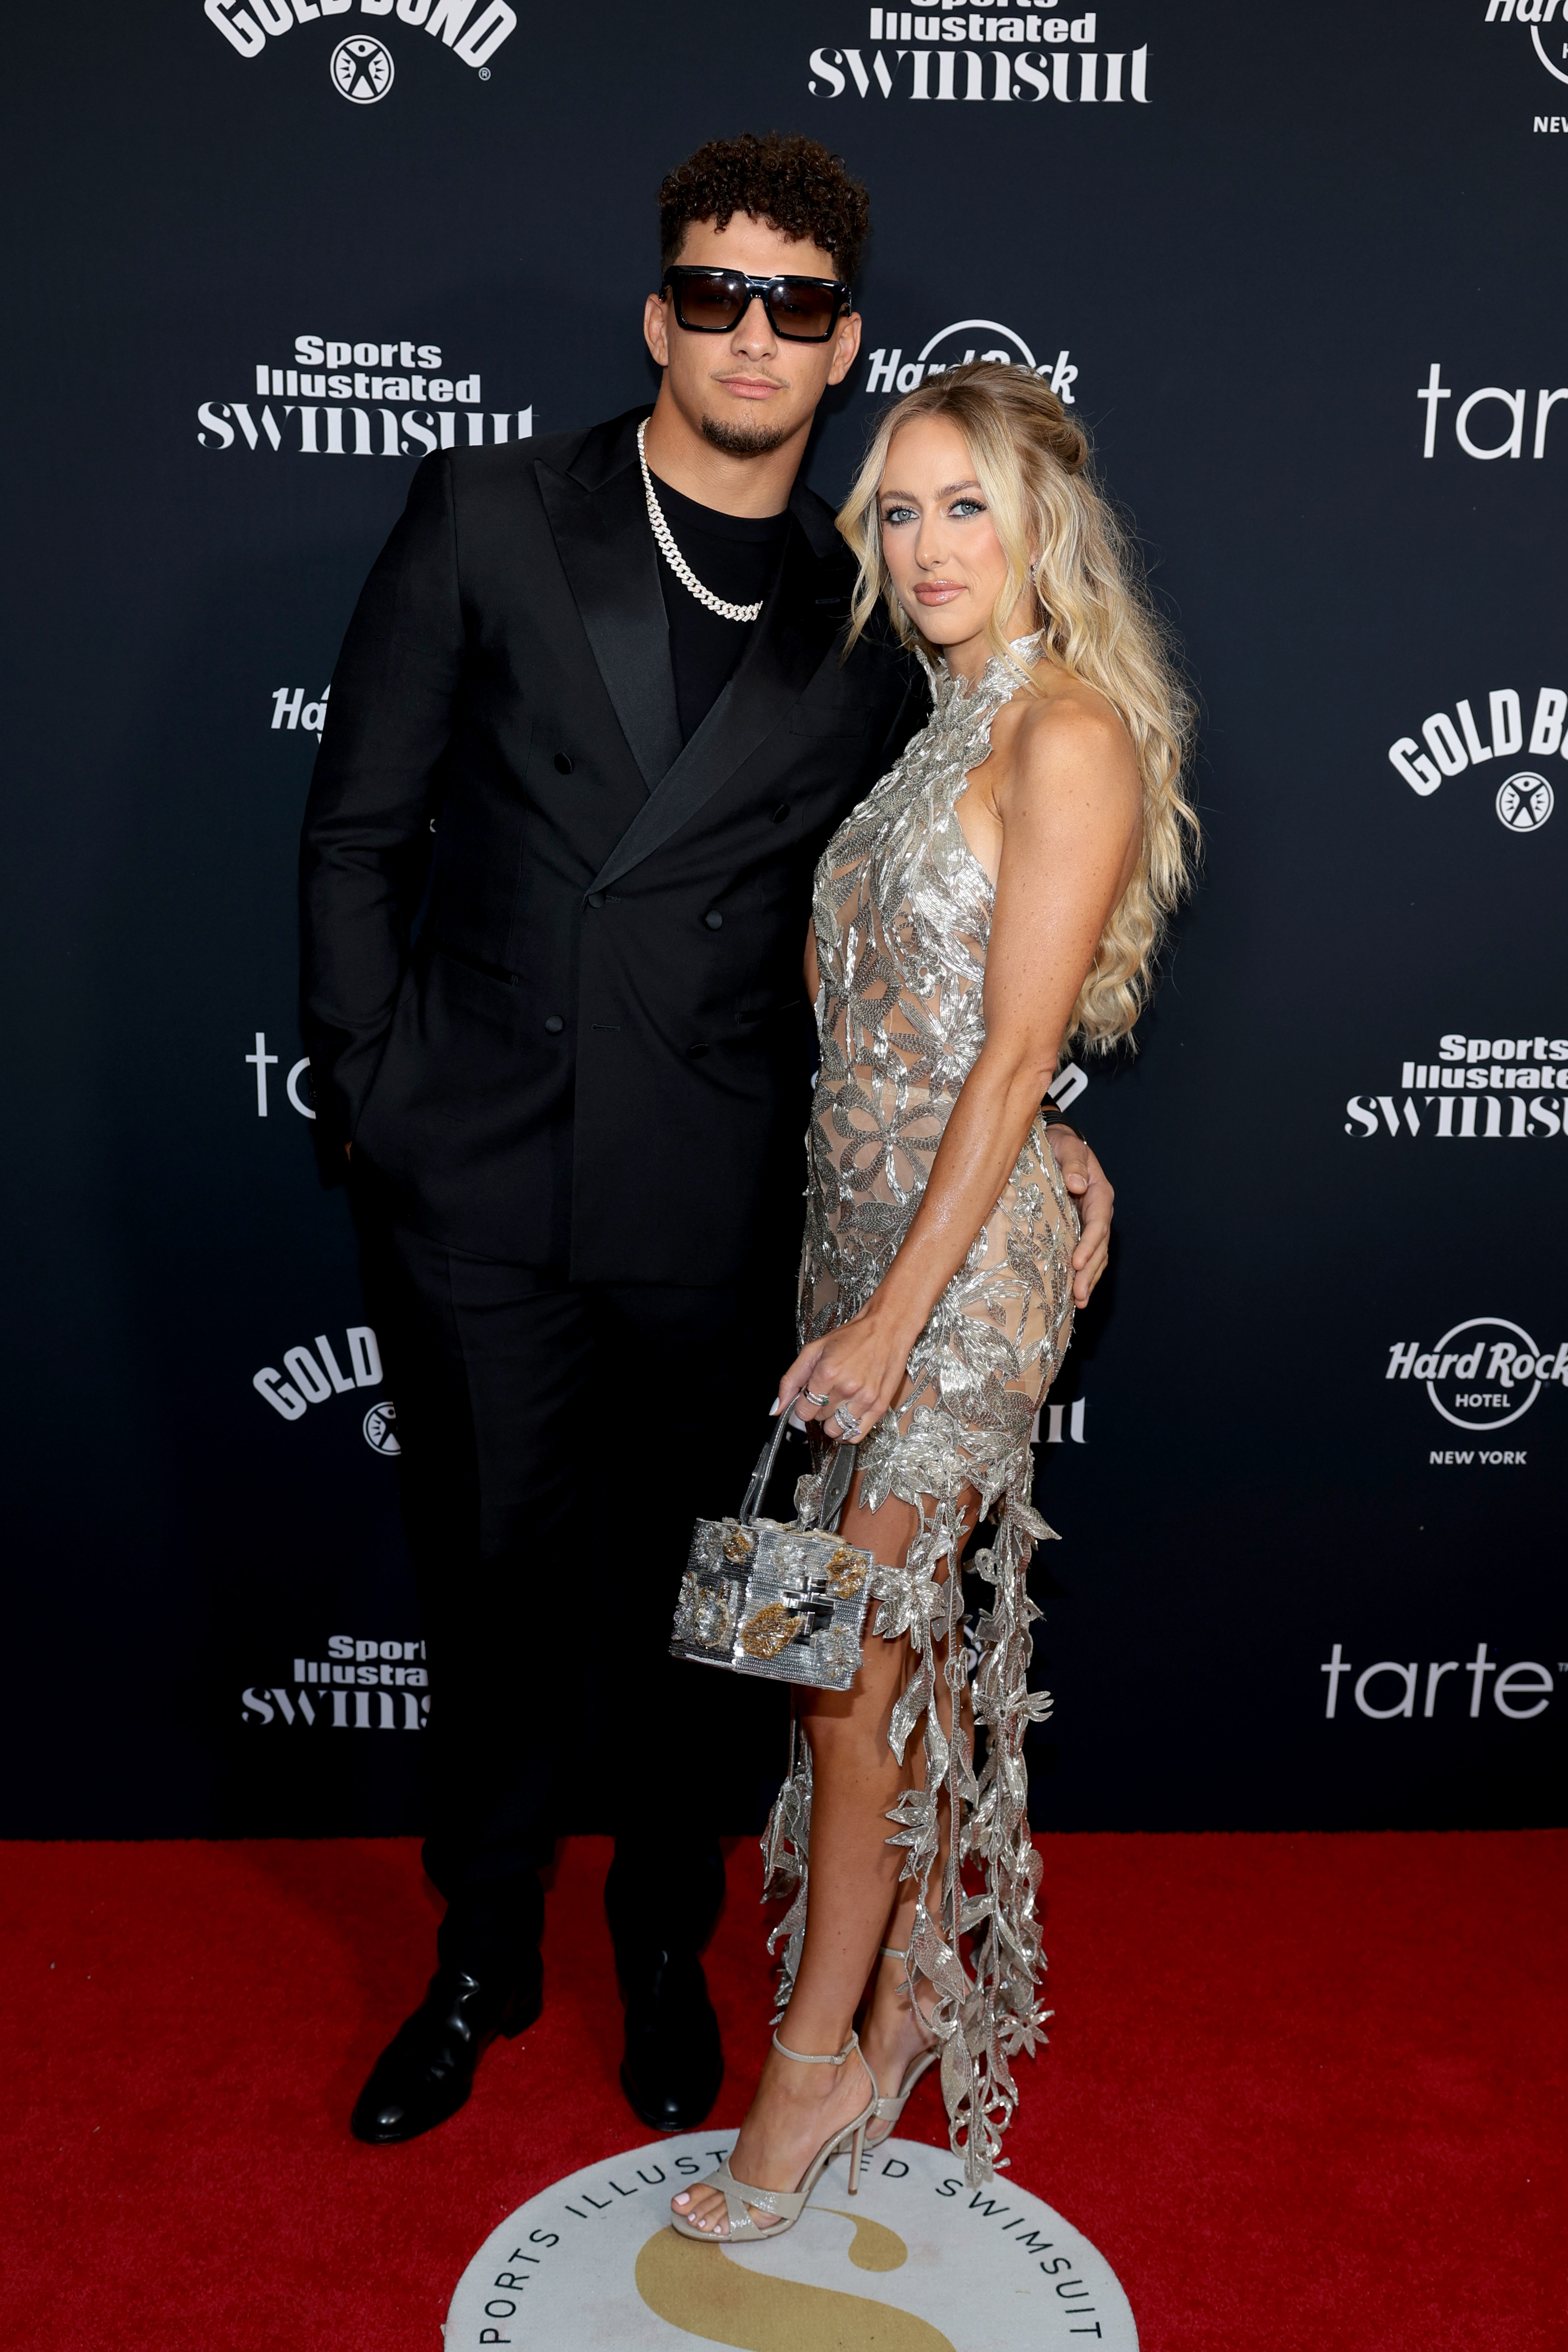 Patrick Mahomes and his wife, Brittany, took their talents to the red carpet at the 2024 Sports Illustrated Swimsuit Issue launch party in New York City on Thursday night